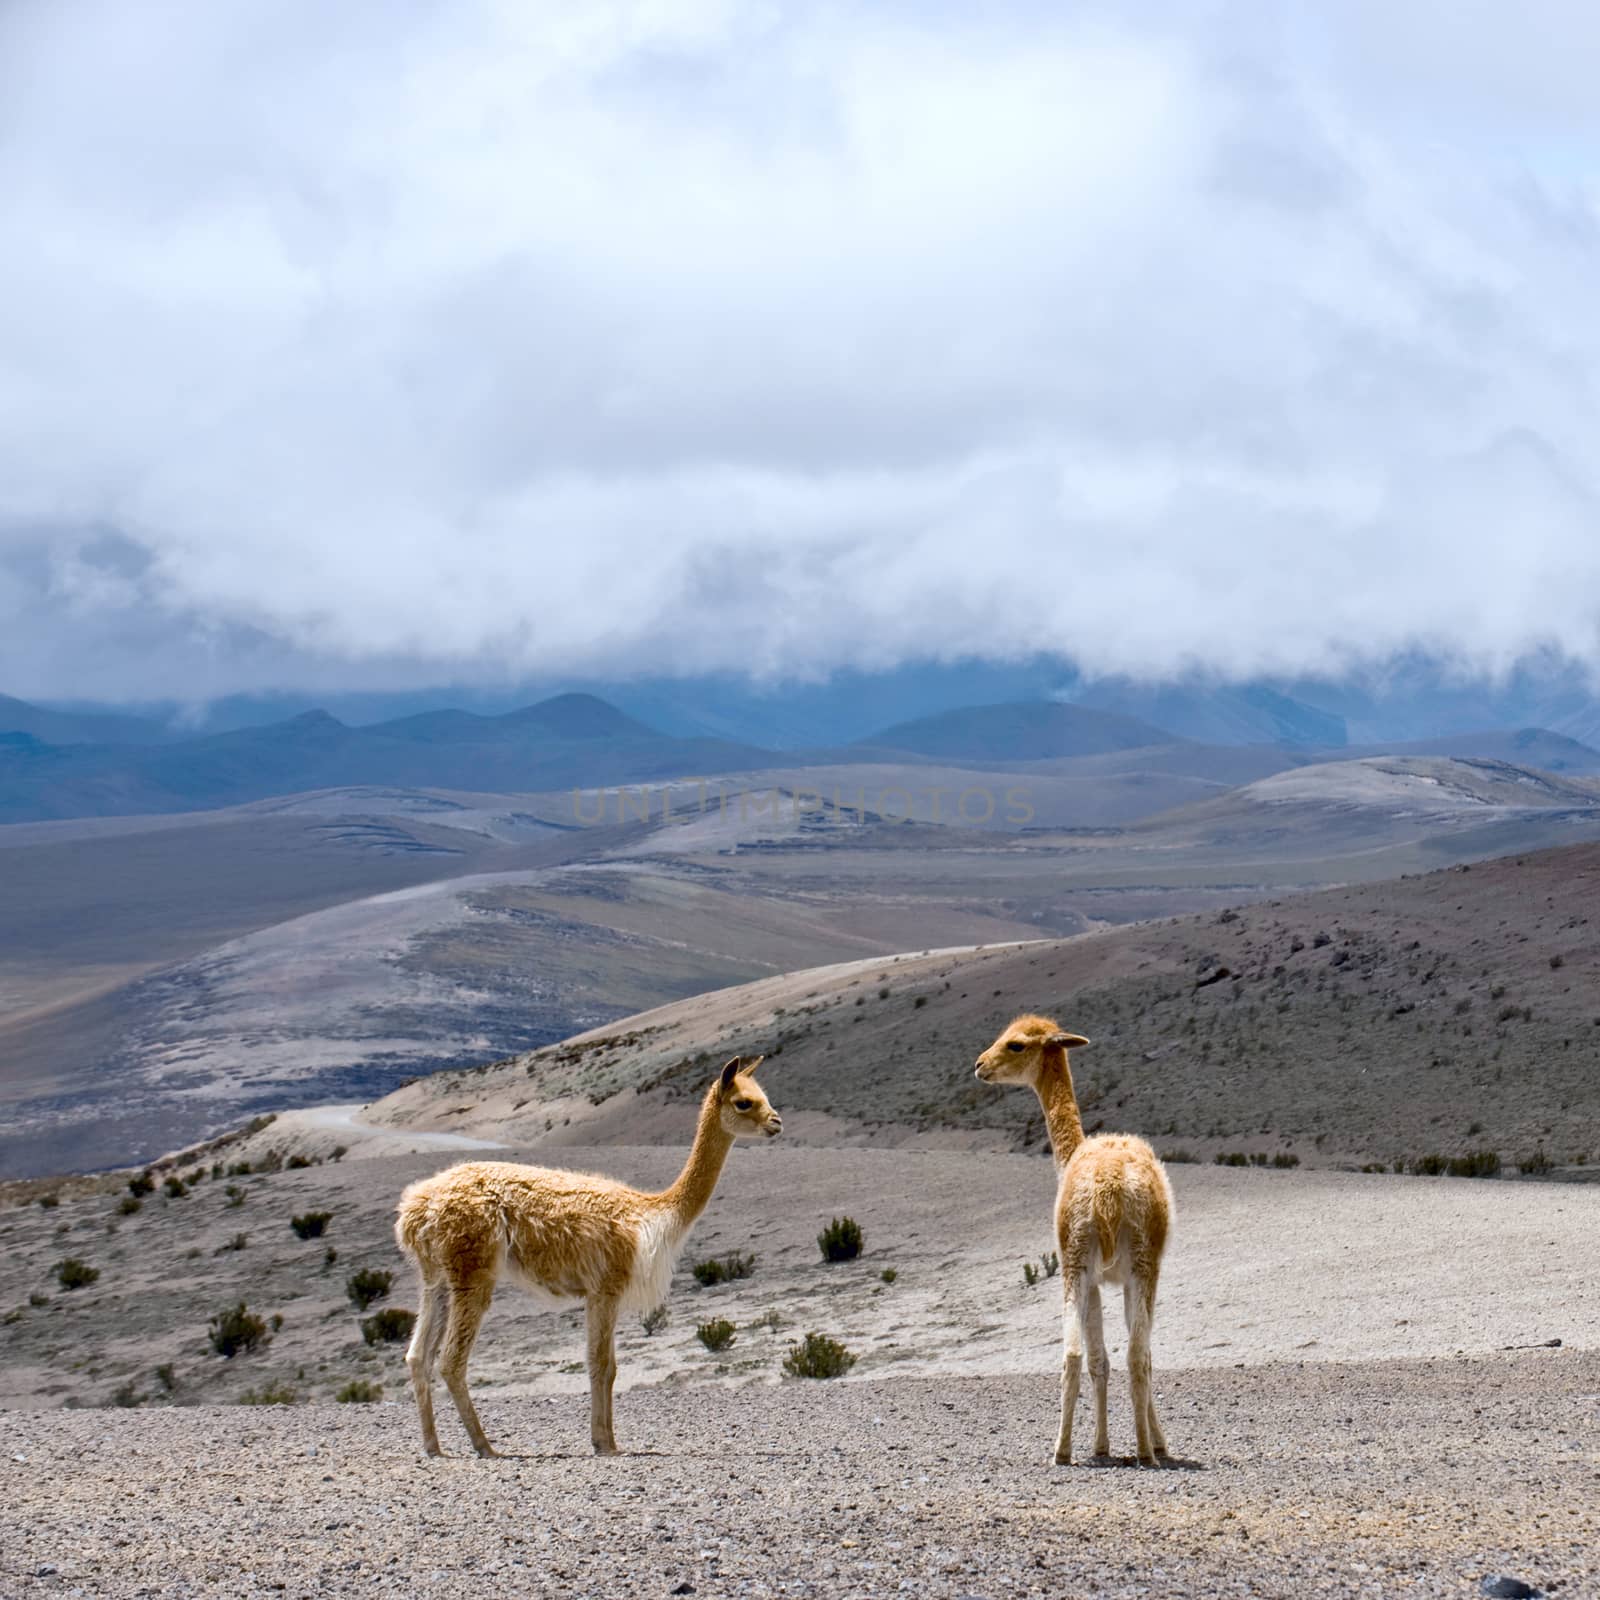 Vicuna (Vicugna vicugna) or vicugna is wild South American camelid, which live in the high alpine areas of the Andes. It is a relative of the llama. Andes of central Ecuador